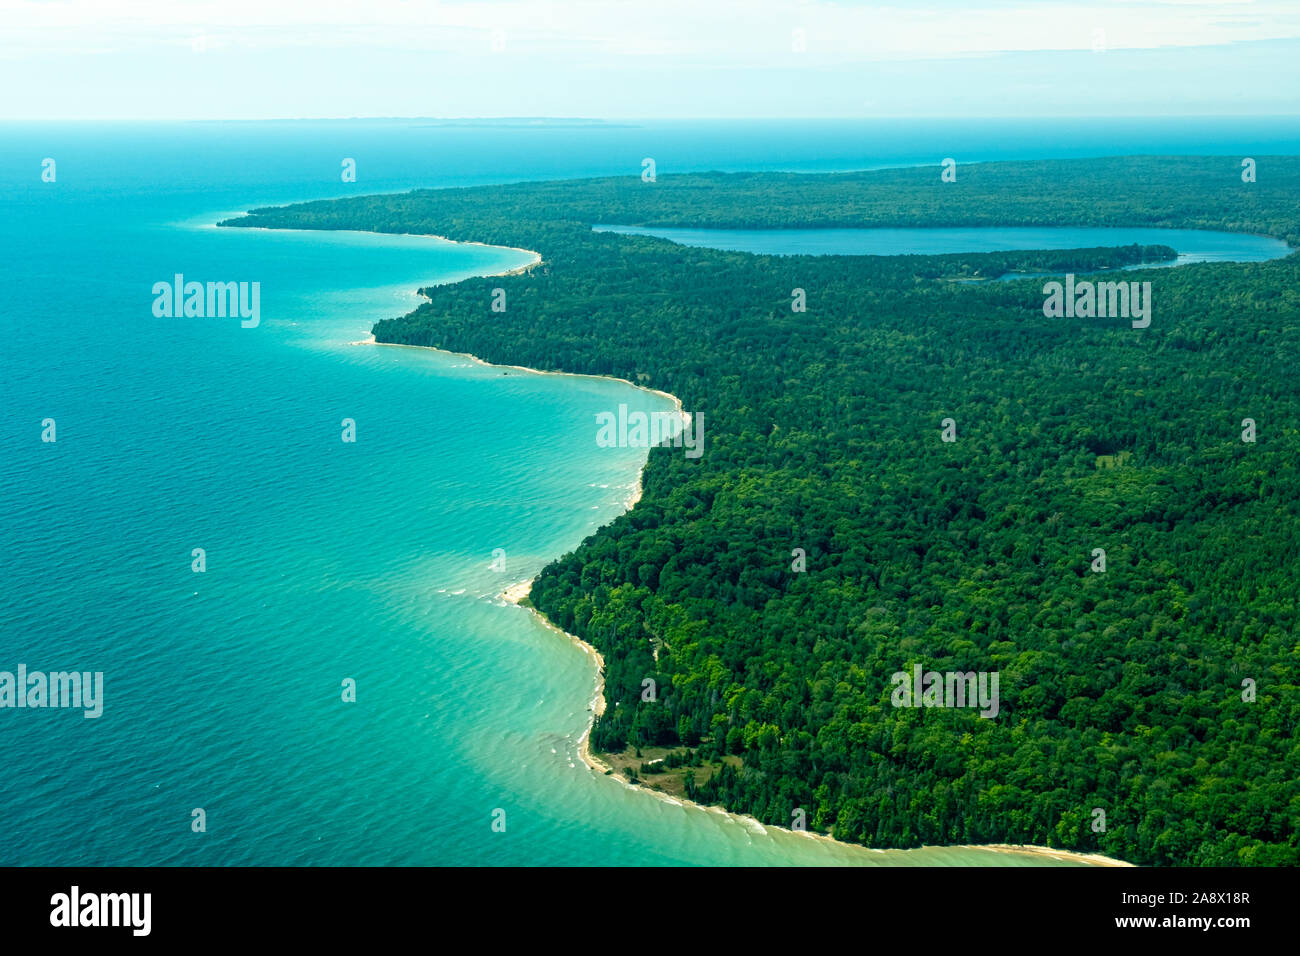 Aerial view of part of the coast of Beaver Island in Lake Michigan. Stock Photo